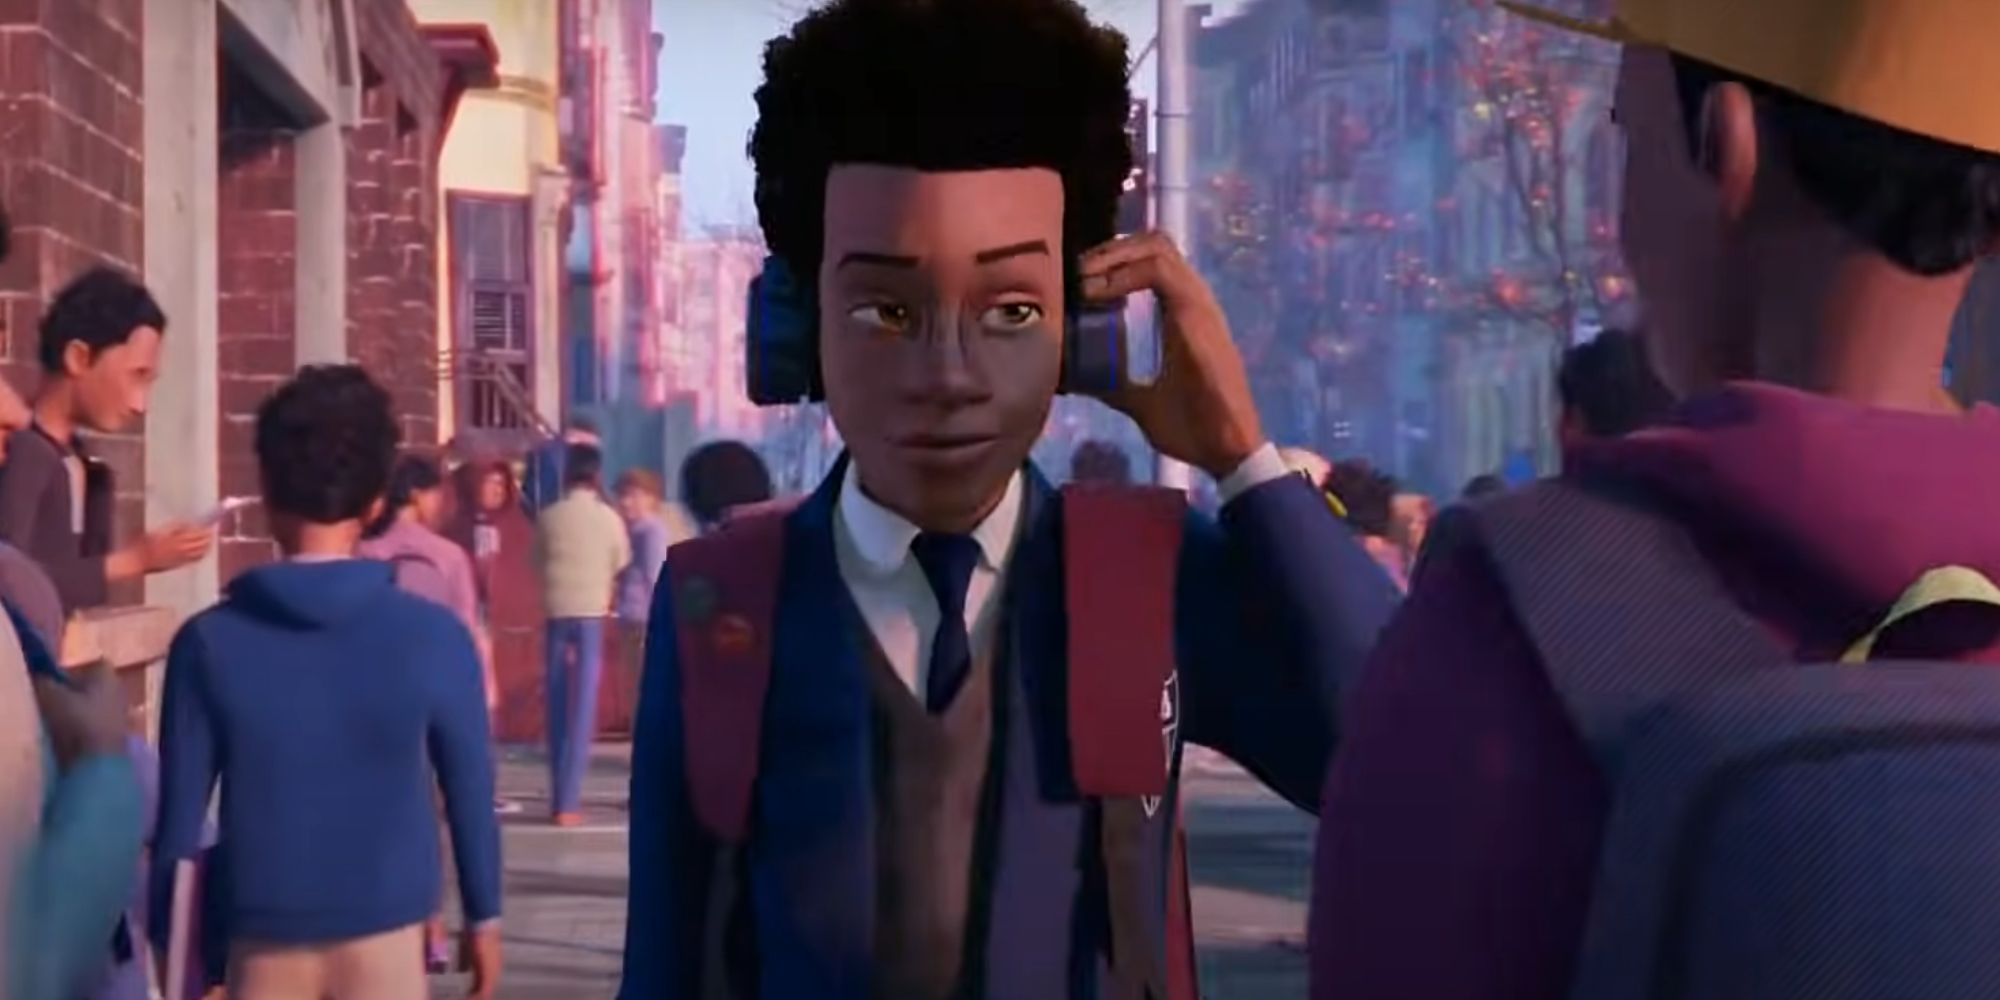 Miles Morales smiling with headphones on as he walks down the street in Spider-Man: Into the Spider-Verse